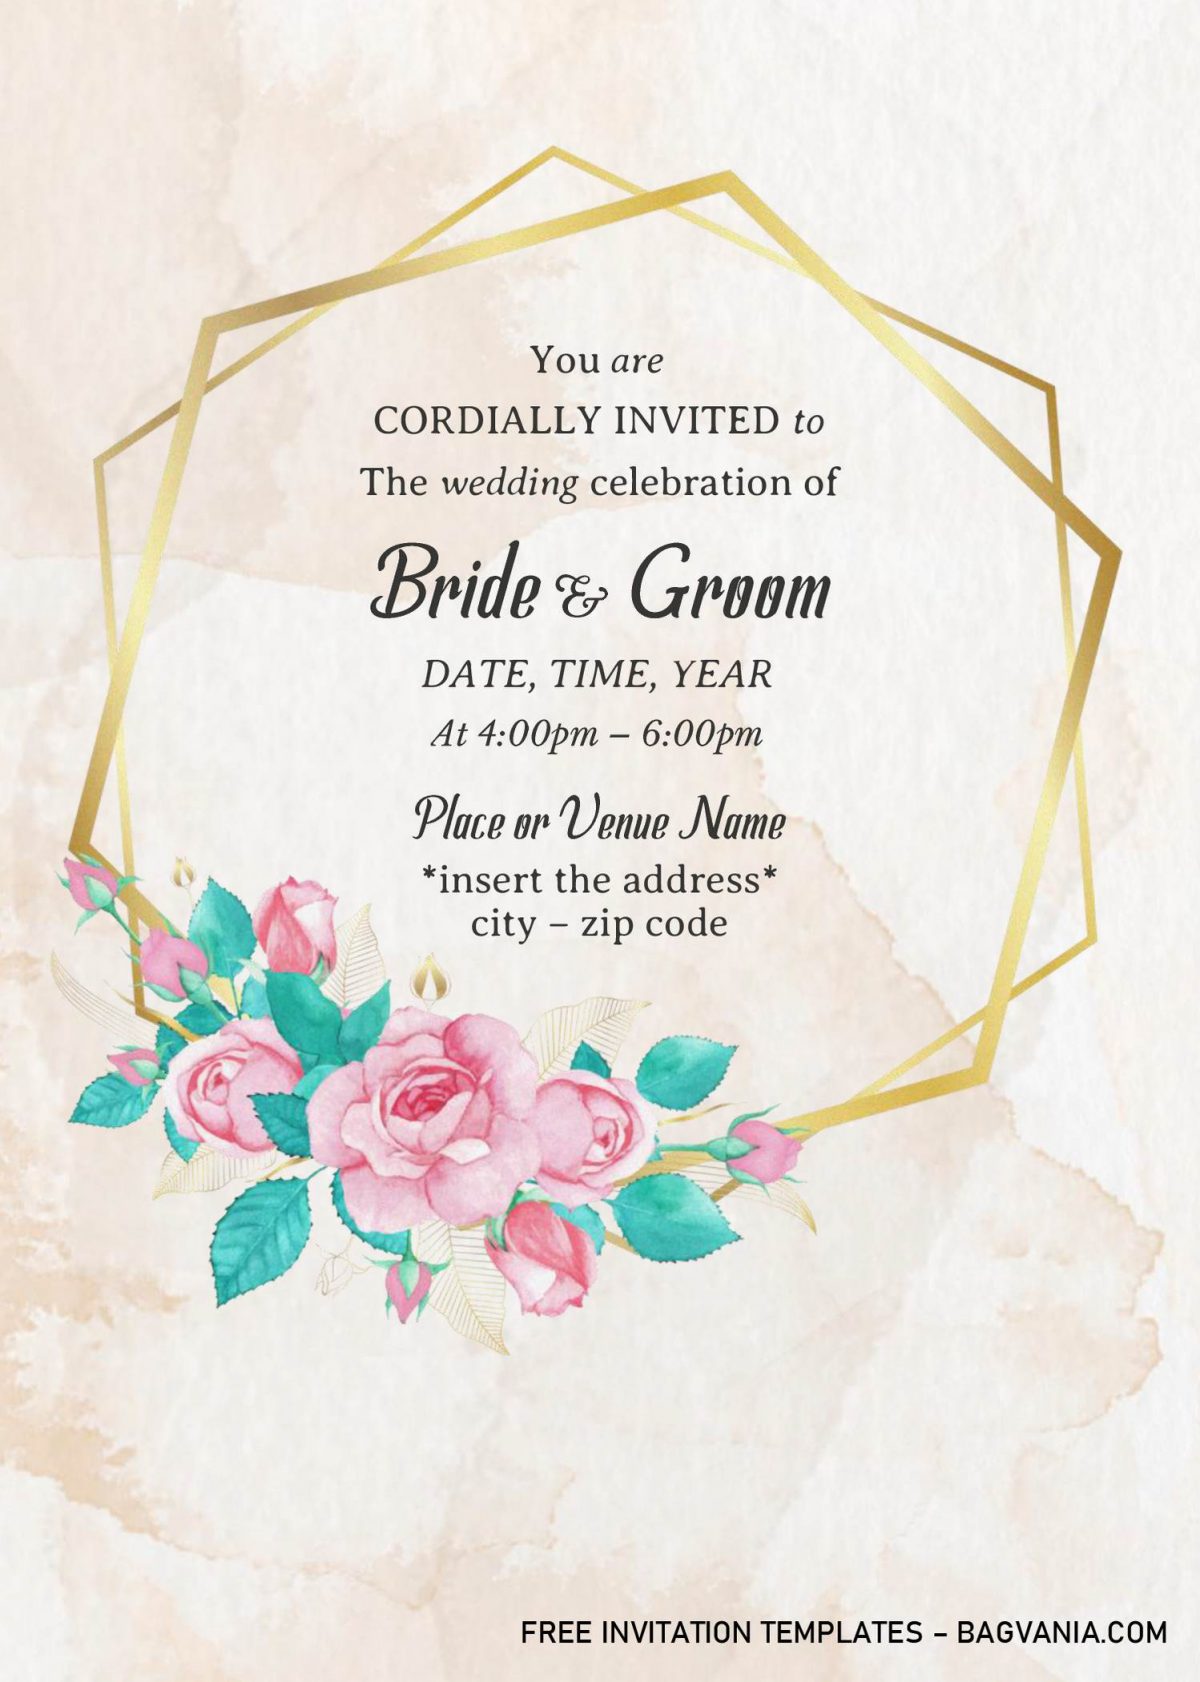 Gold Frame Floral Wedding Invitation Templates - Editable With MS Word and has gold geometric frame